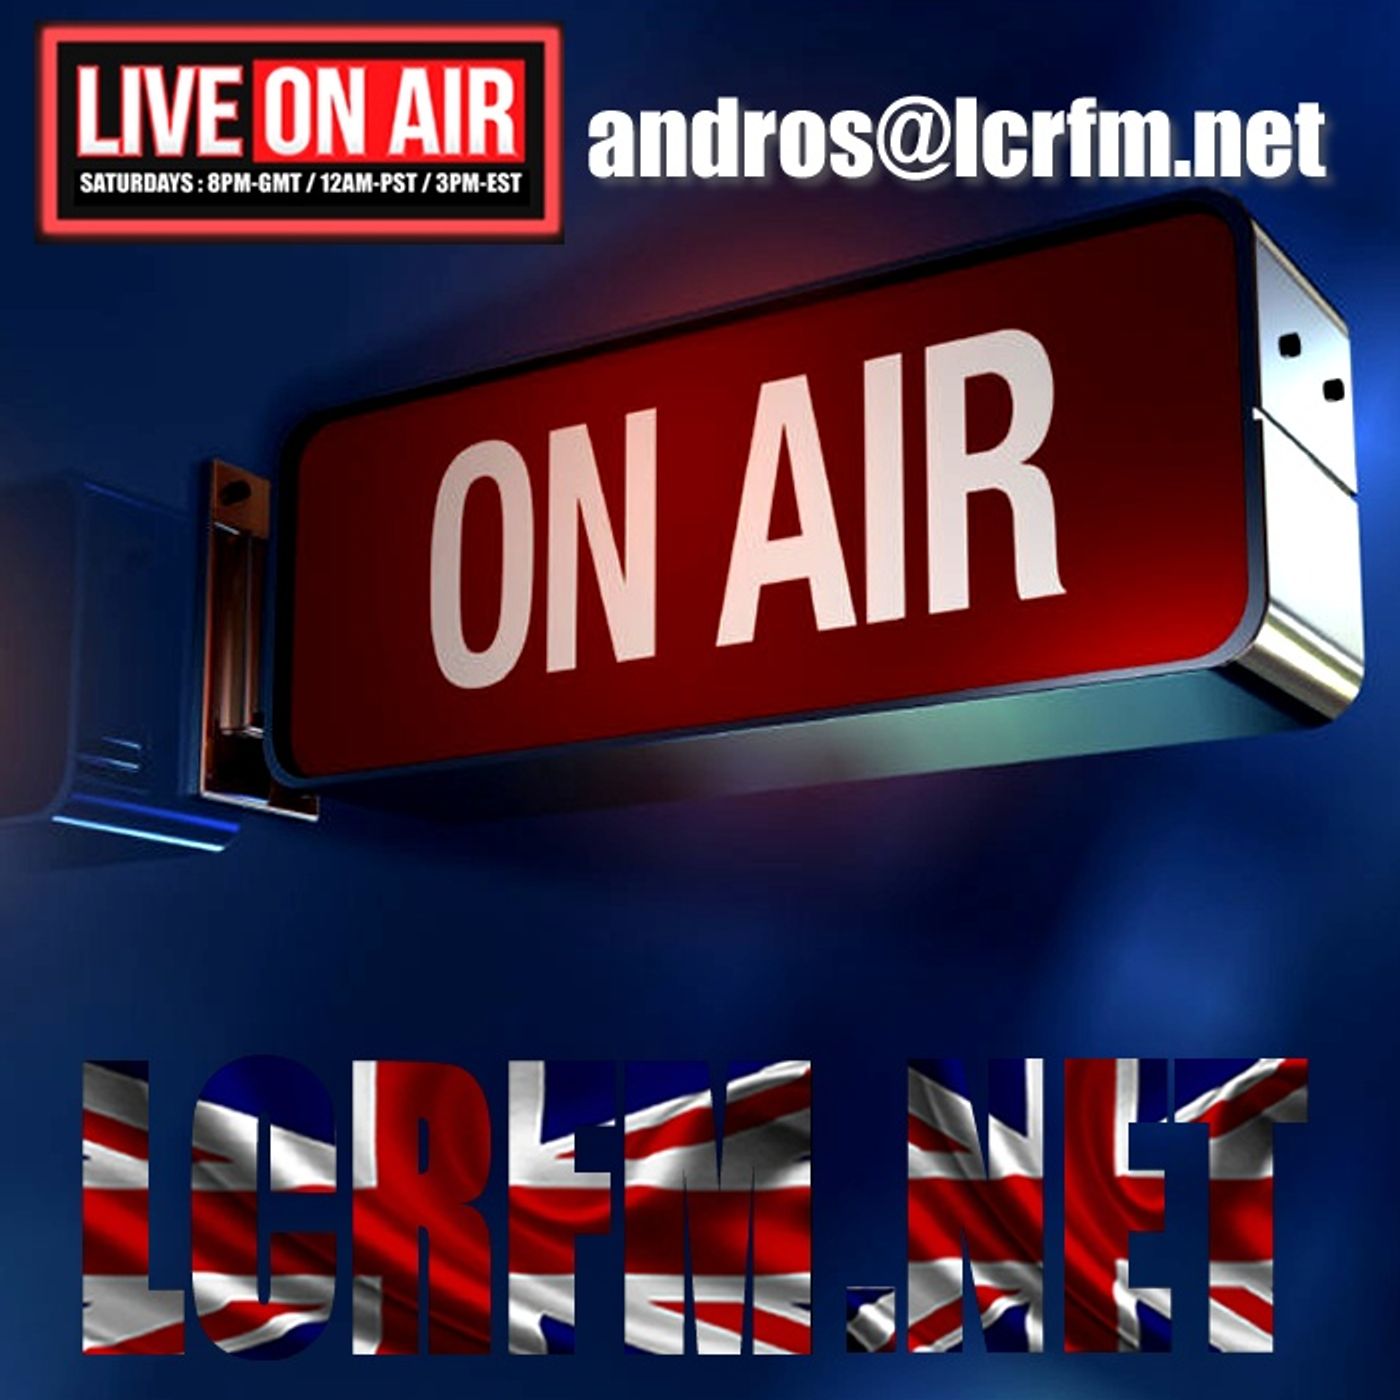 "You Know its Not The Same” Saturday December 3rd … on LCRFM …LIVE FROM LONDON" LCRFM - The London Calling Radio Show on androsgeorgiou com